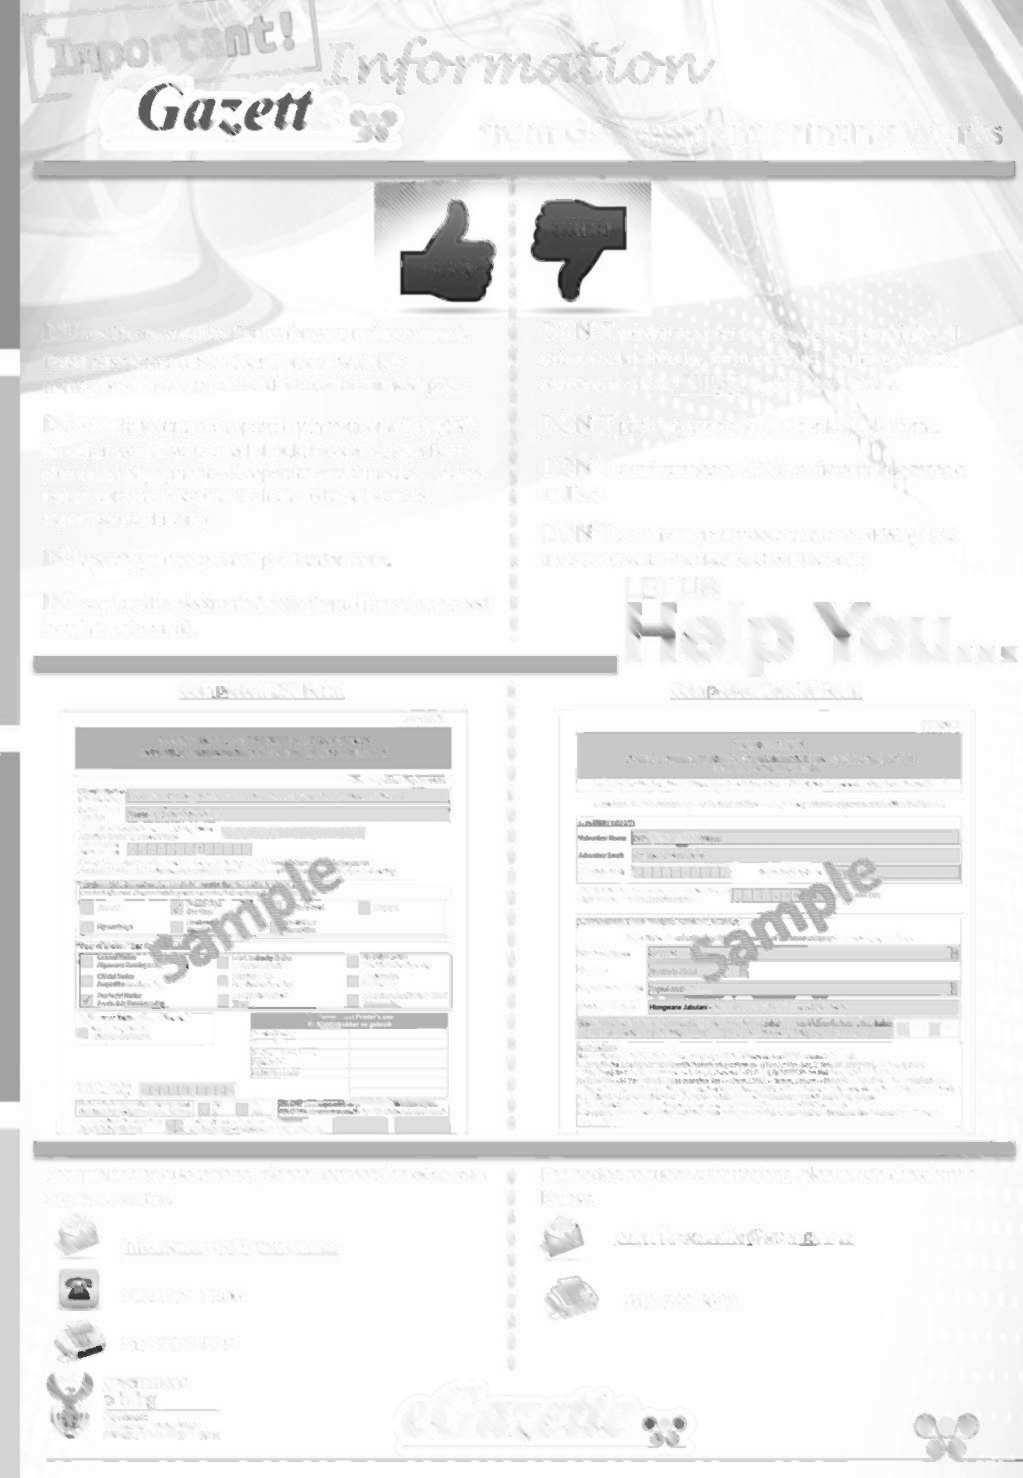 2 No. 38609 GOVERNMENT GAZETTE, 25 MARCH 2015 egazette nfo-rmaruyn. from Government Printing Works DO use the new Adobe Forms for your notice request. These new forms can be found on our website: www.